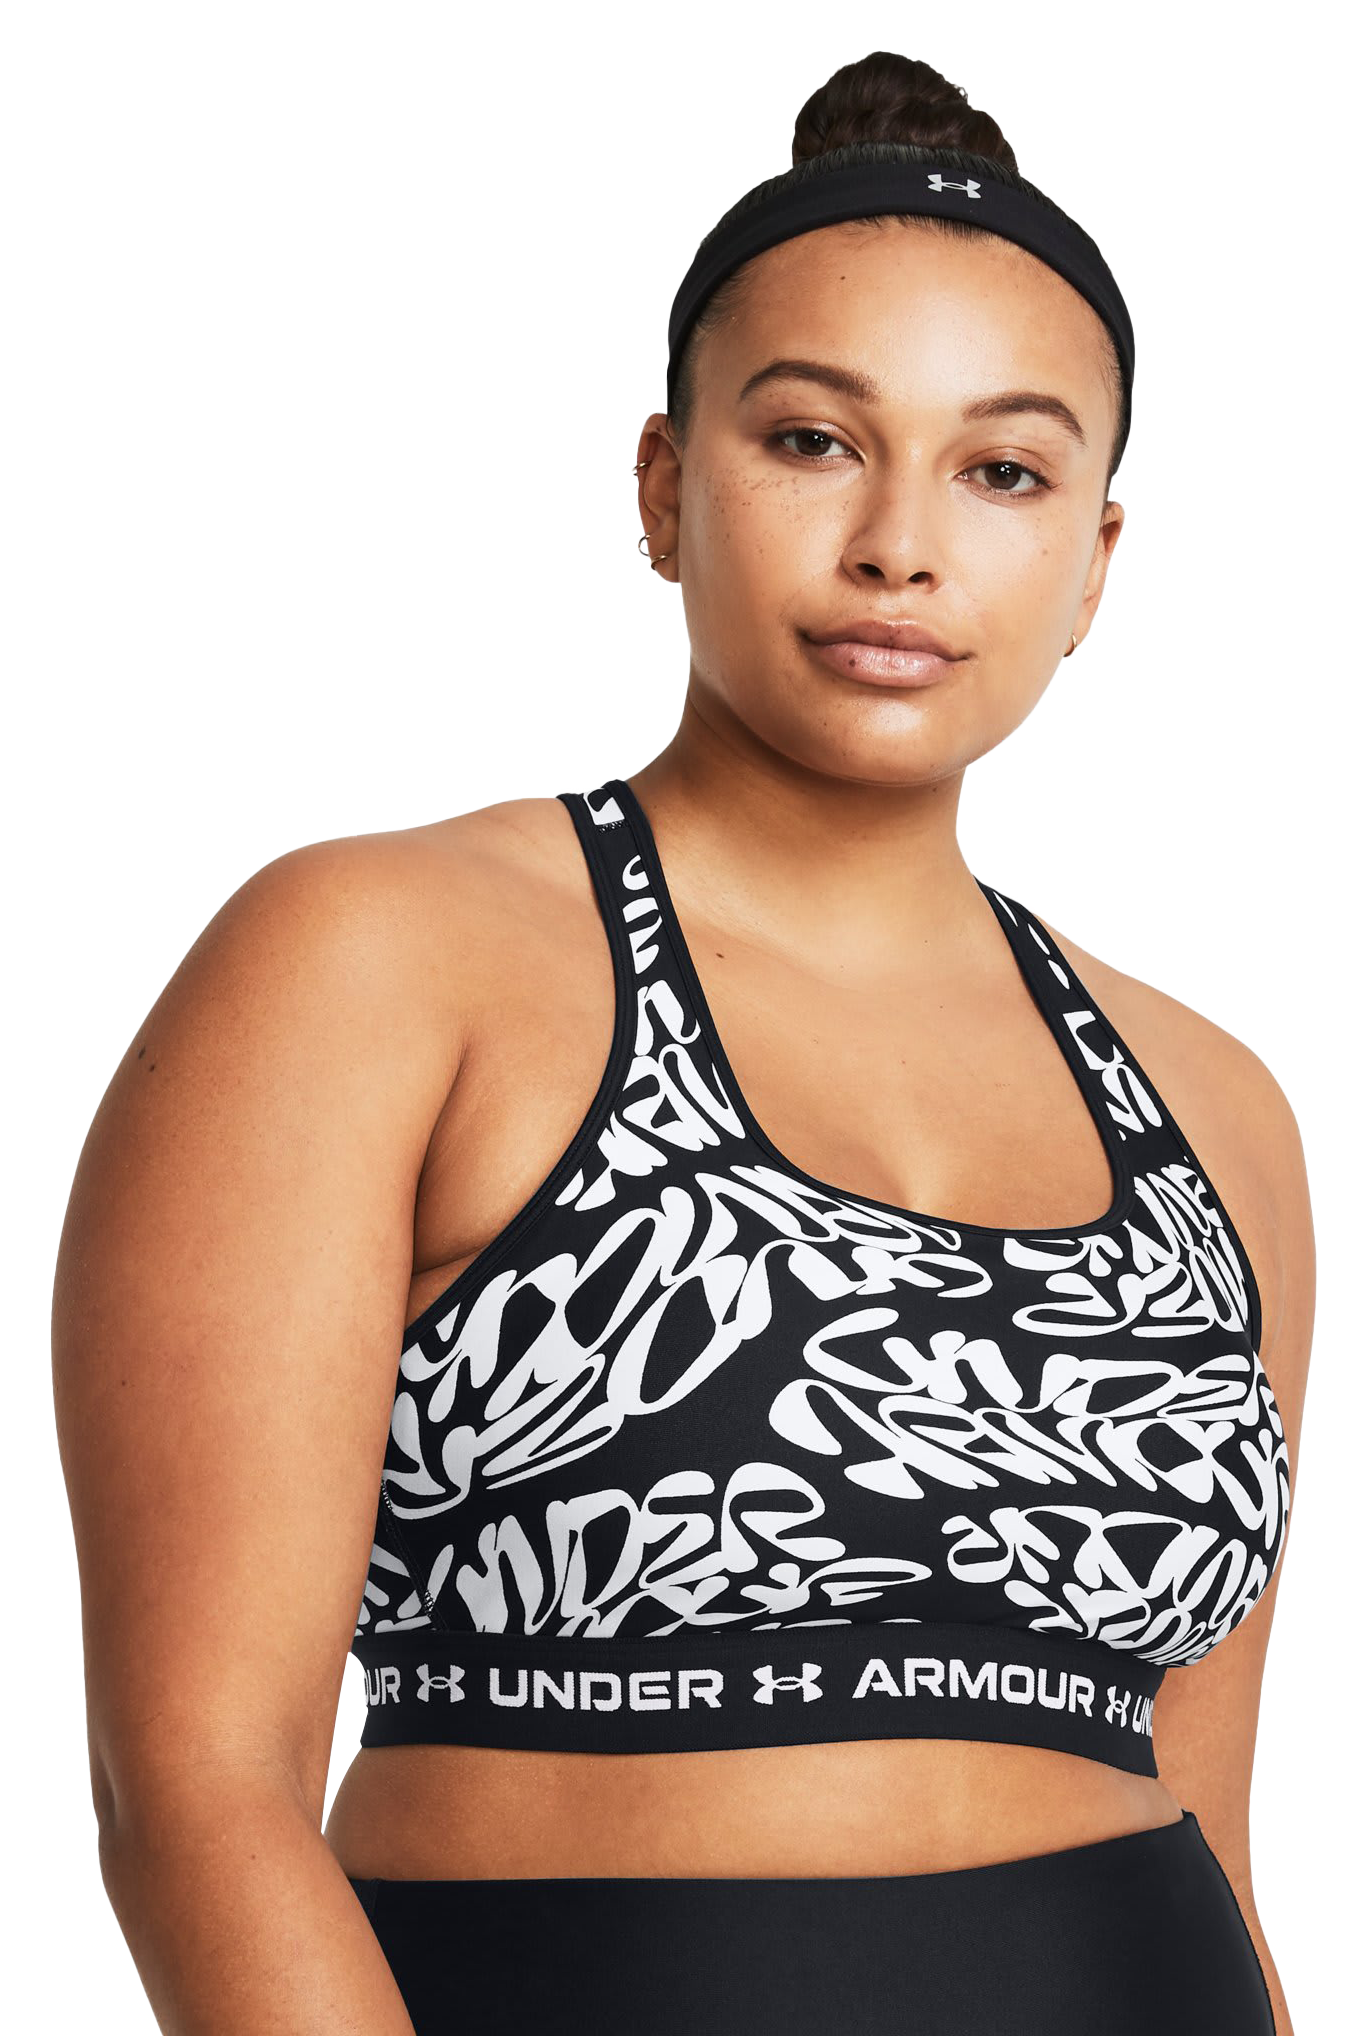 ARMOUR MID CROSSBACK SPORTS BRA WMN'S - Sports Contact